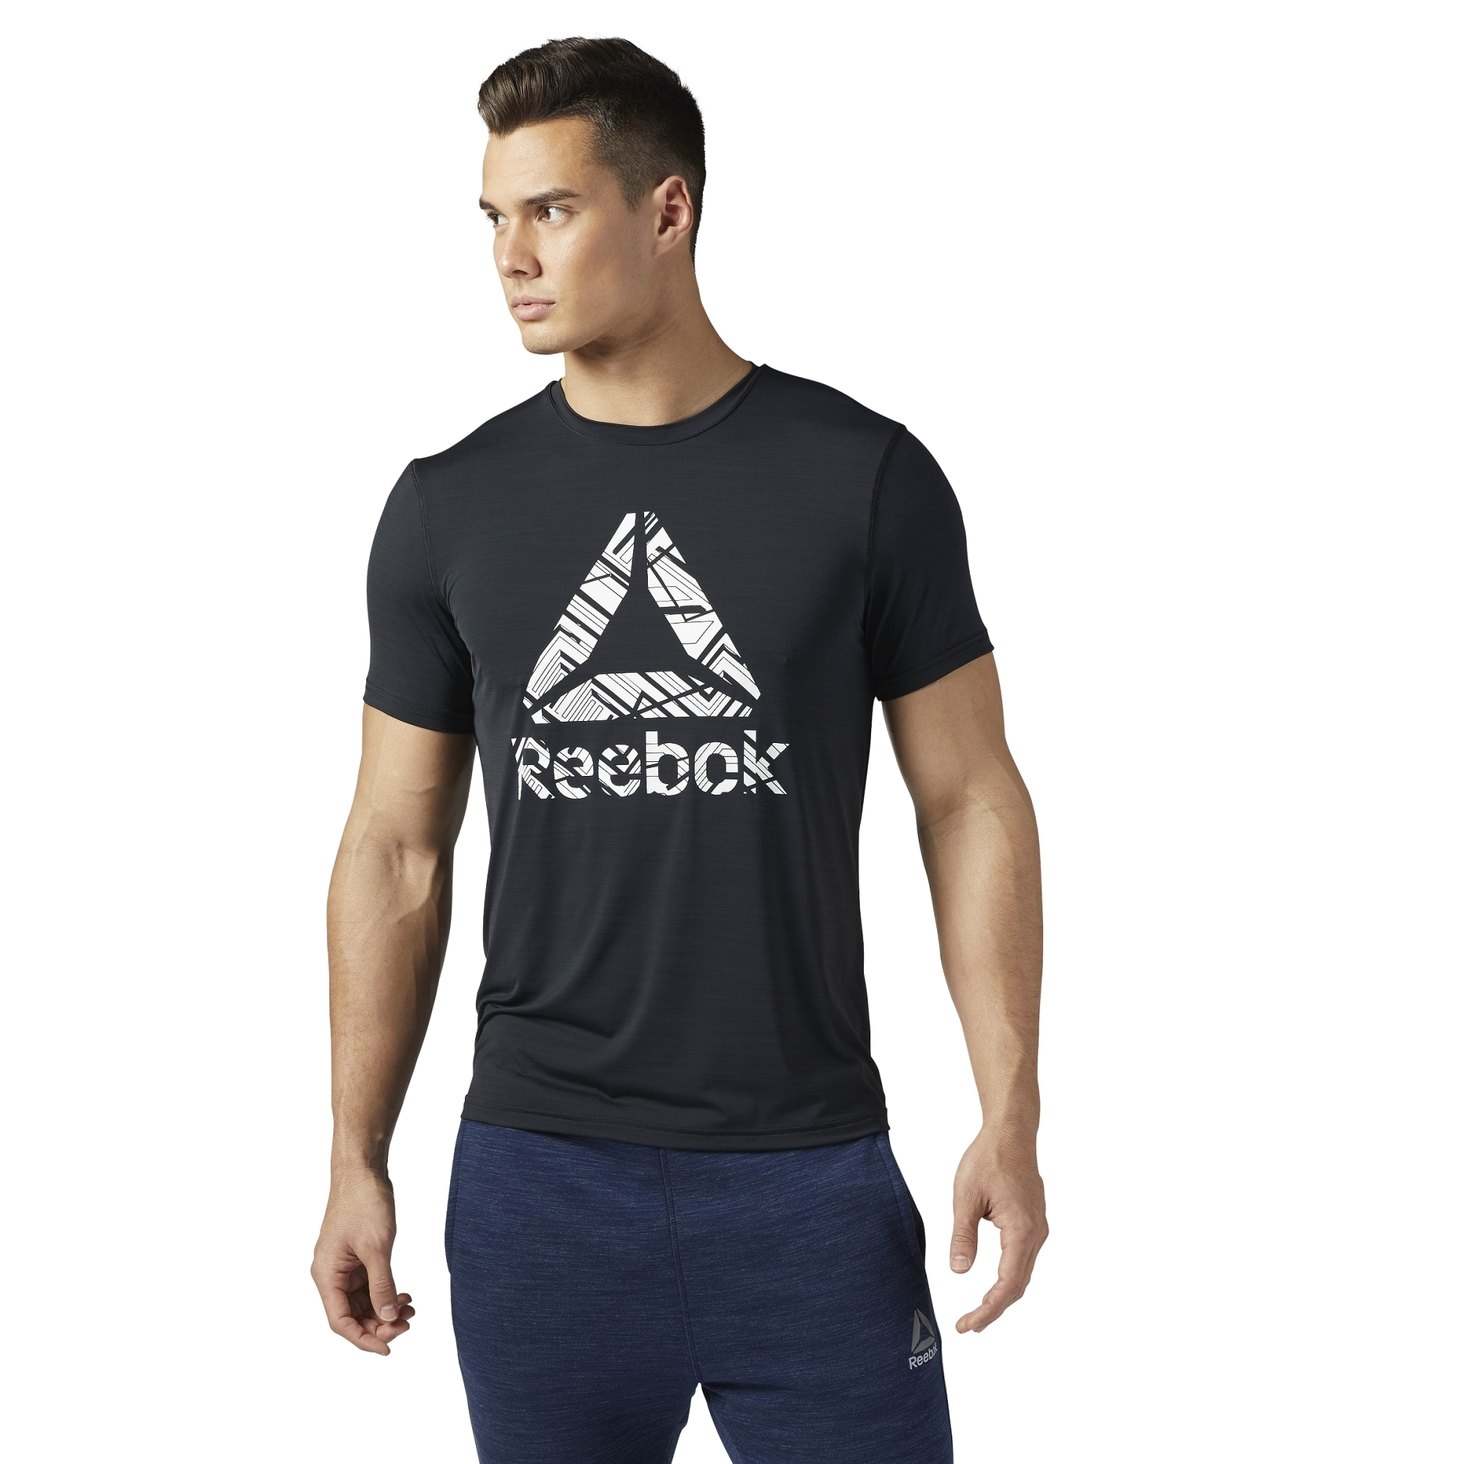 Workout Ready Activchill Graphic Tee